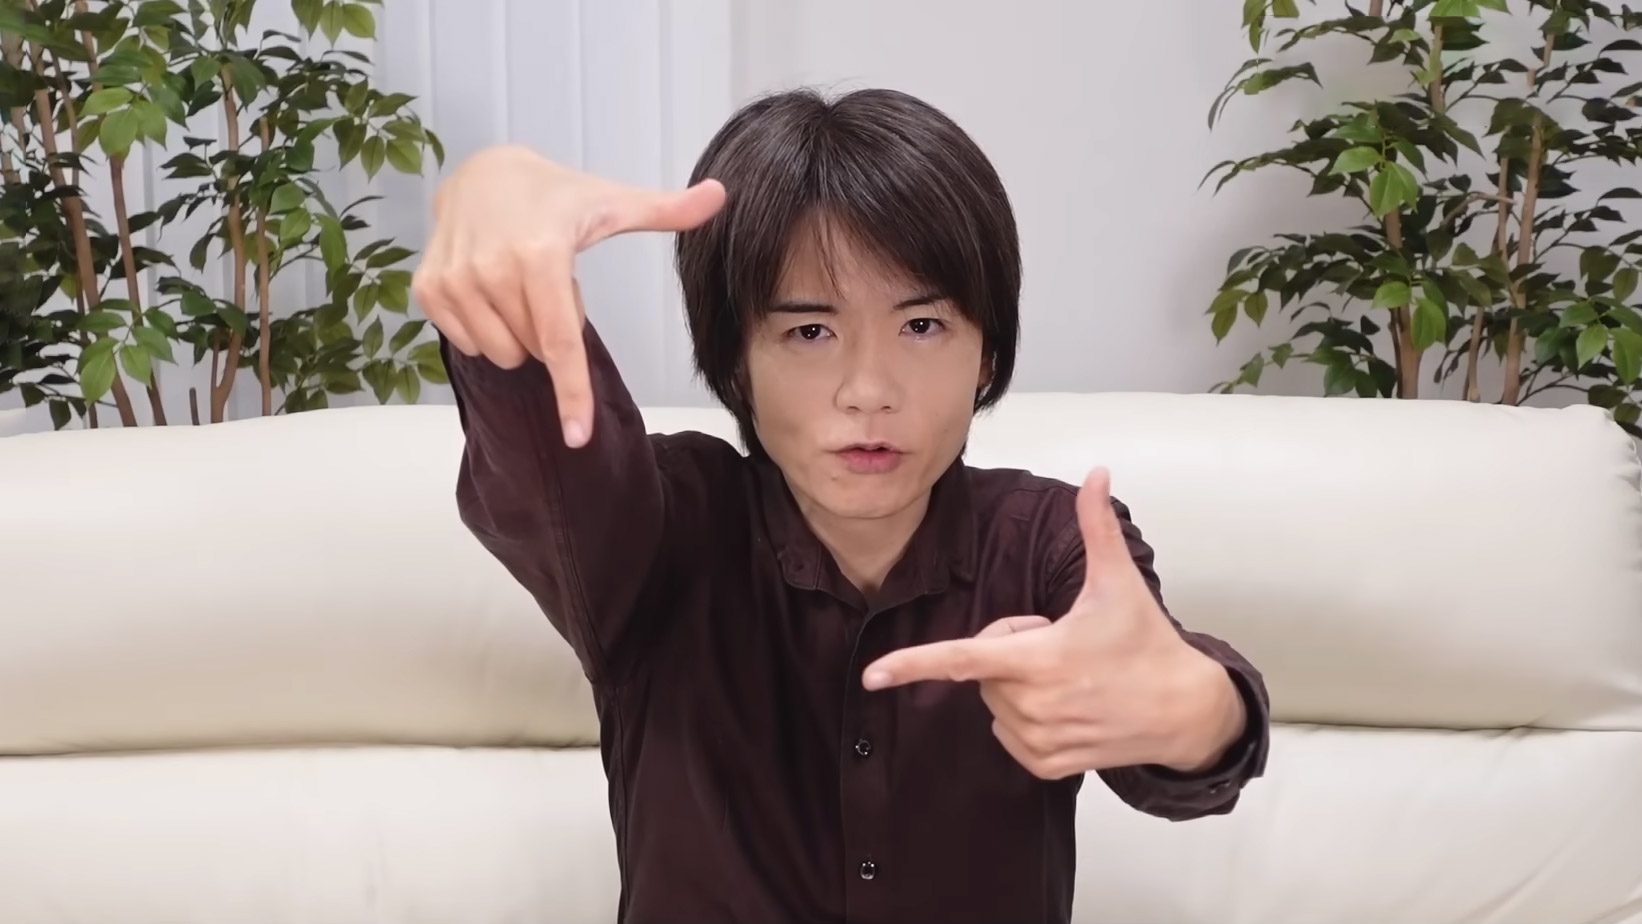 ‘Super Smash Bros’ Creator Masahiro Sakurai Says VR is “Truly the perfect fit” for Some Games